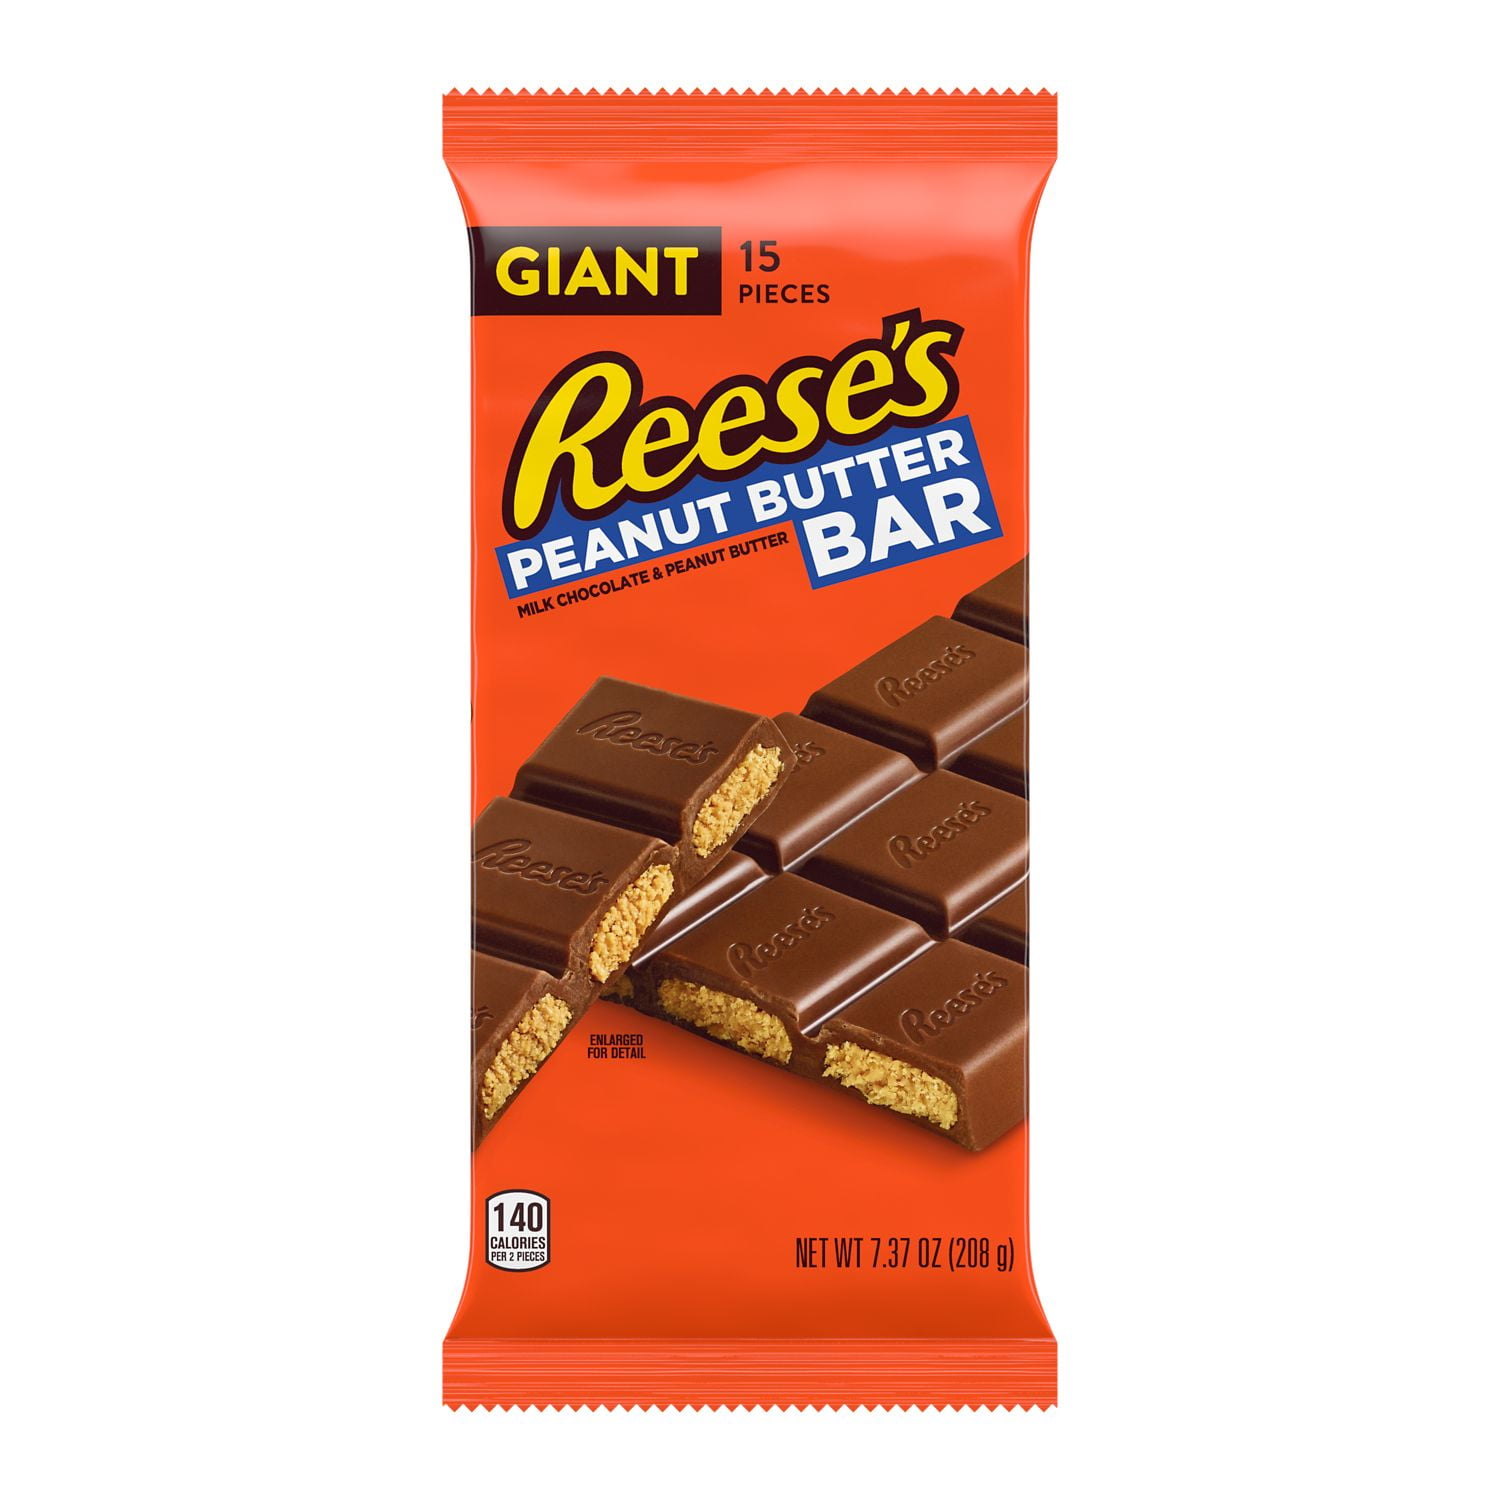 REESE'S, Milk Chocolate filled with REESE'S Peanut Butter Giant Candy, 7.37 oz, Bar (15 Pieces)